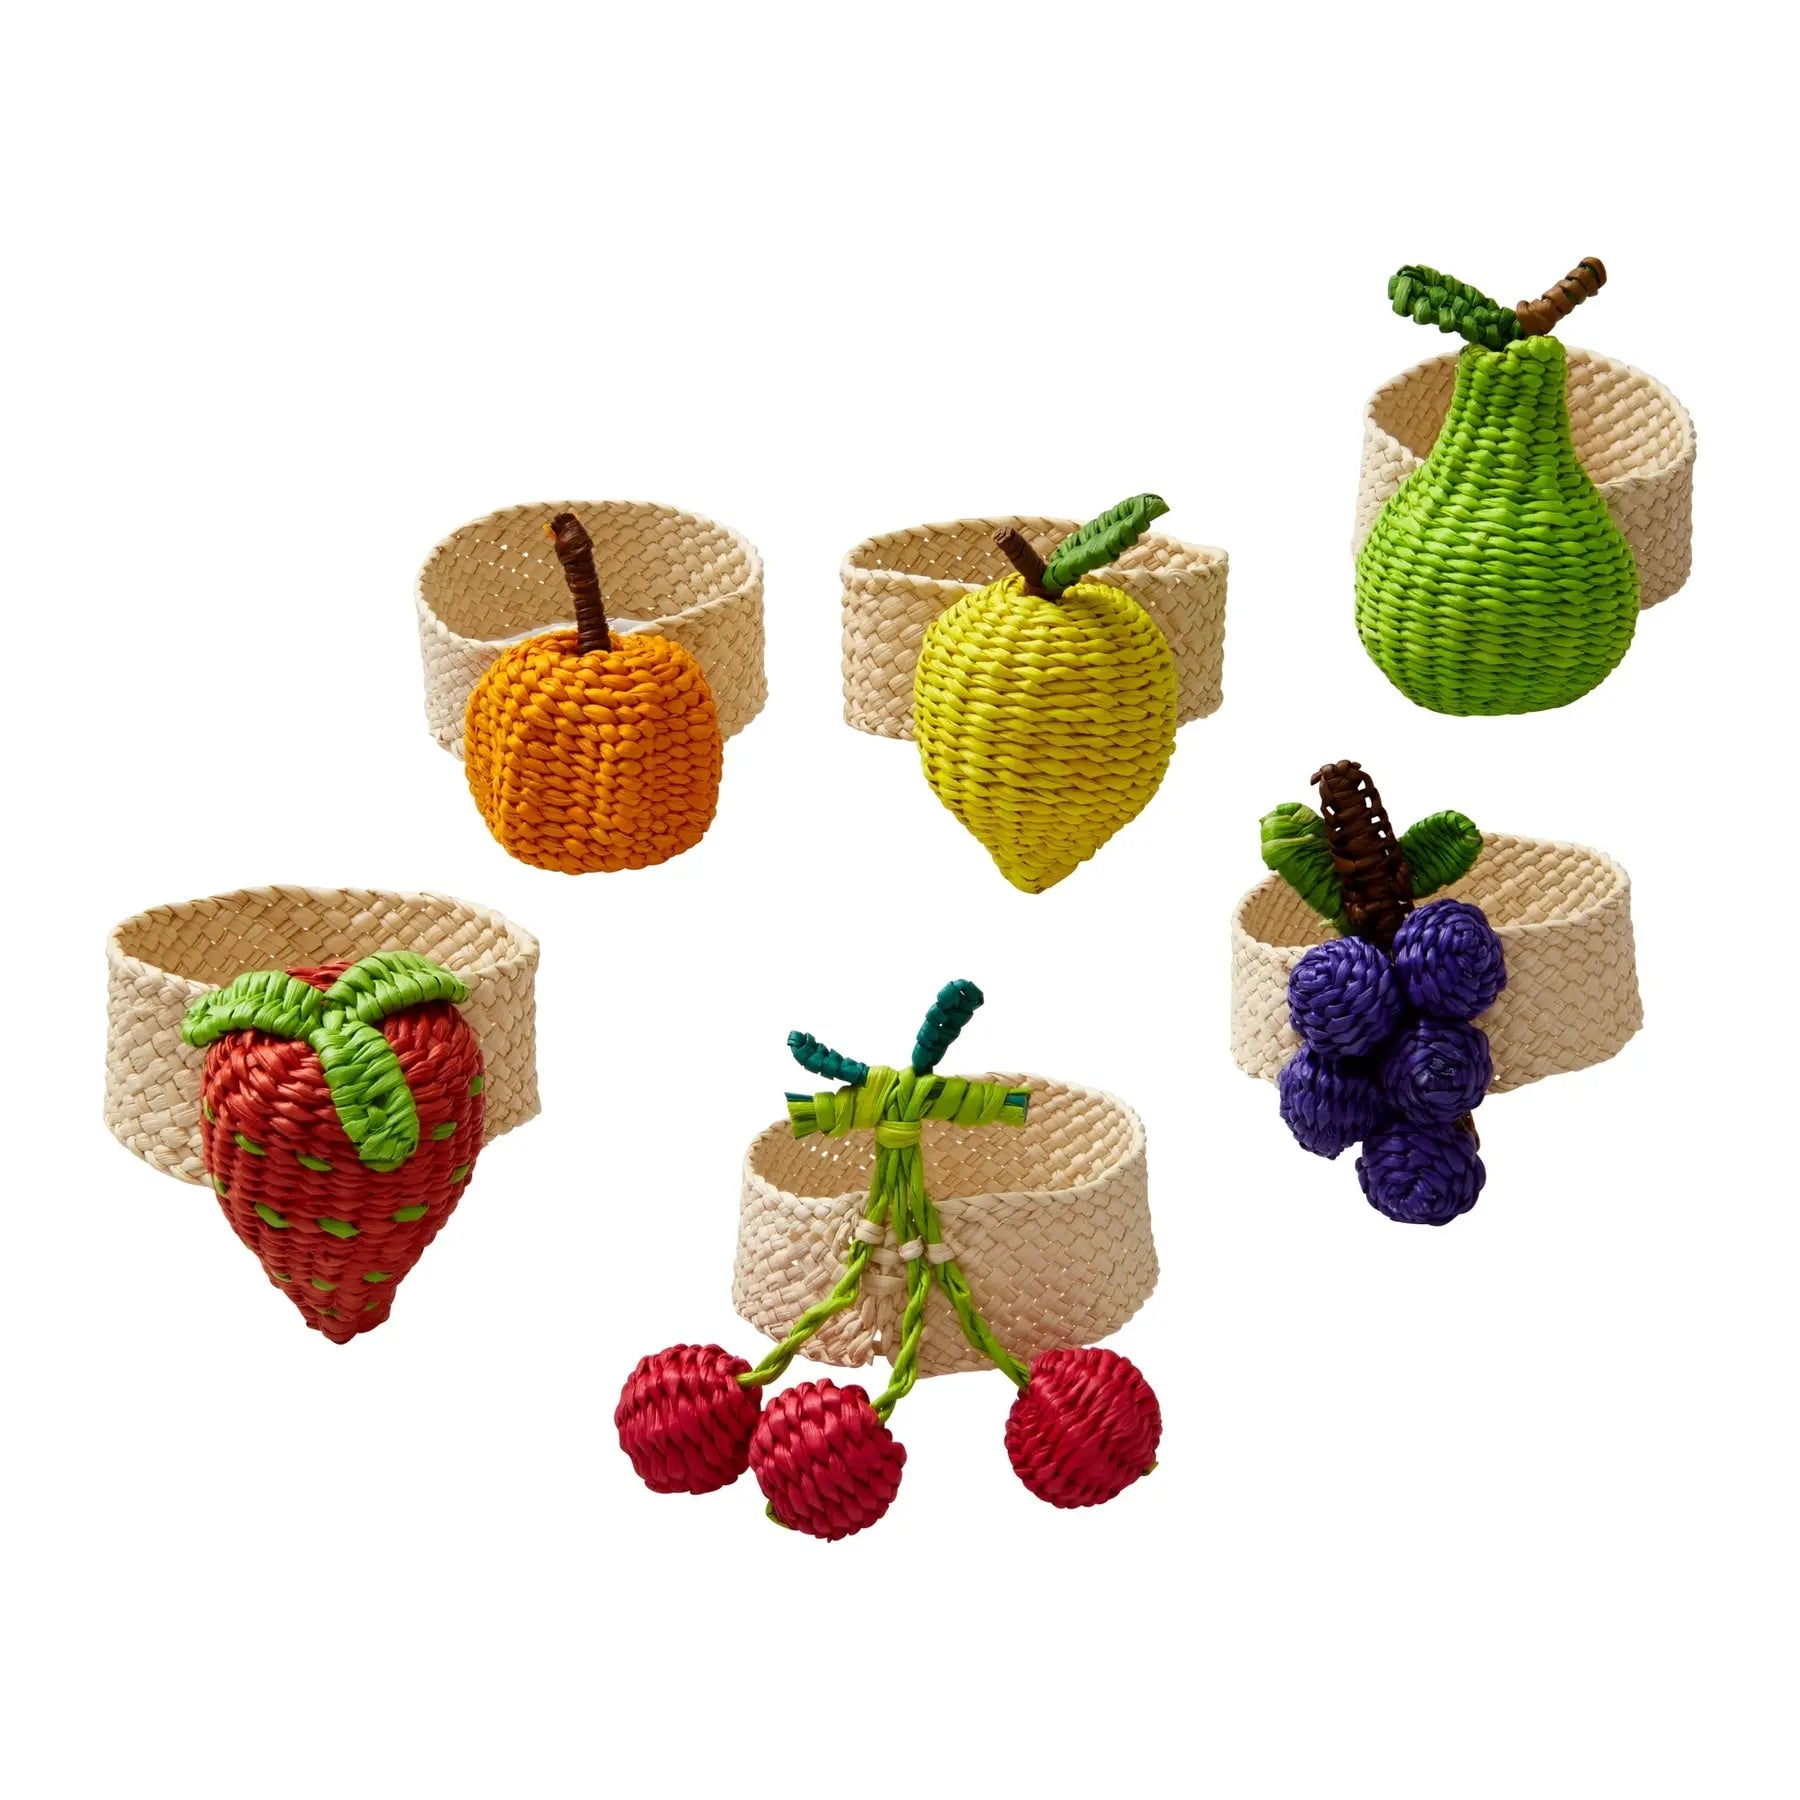 Mode Living Orchard Napkin Ring Collection shown with Cherry Grapes Lemon Pear Pumpkin Strawberry.